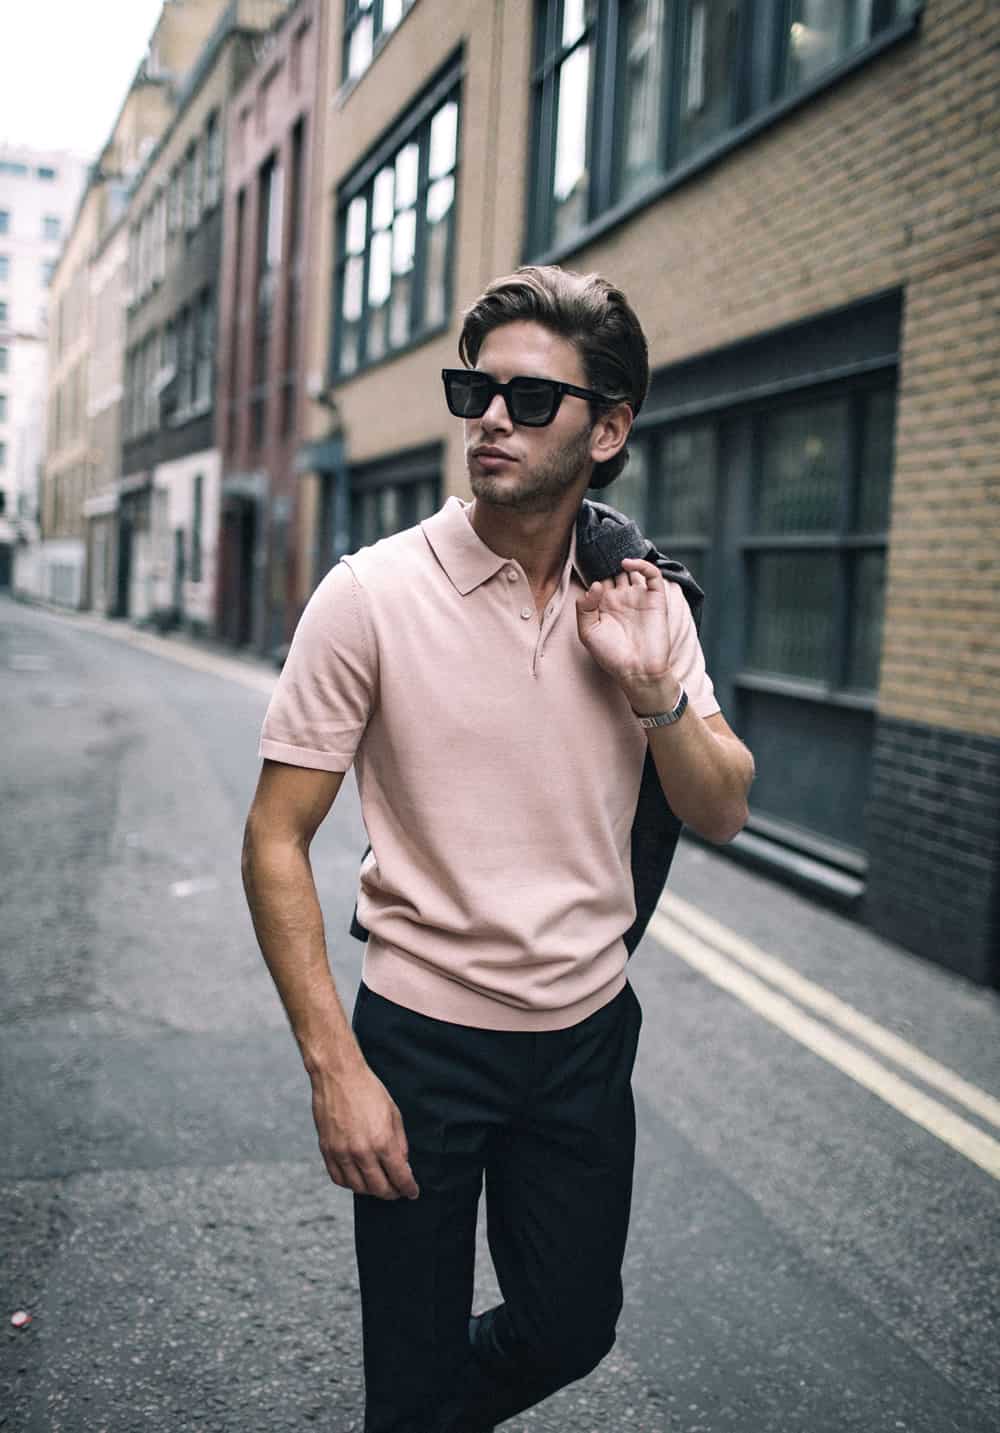 Eyal Booker from Love Island 2018 - FashionBeans Exclusive photoshoot: pink knitted polo shirt and sunglasses